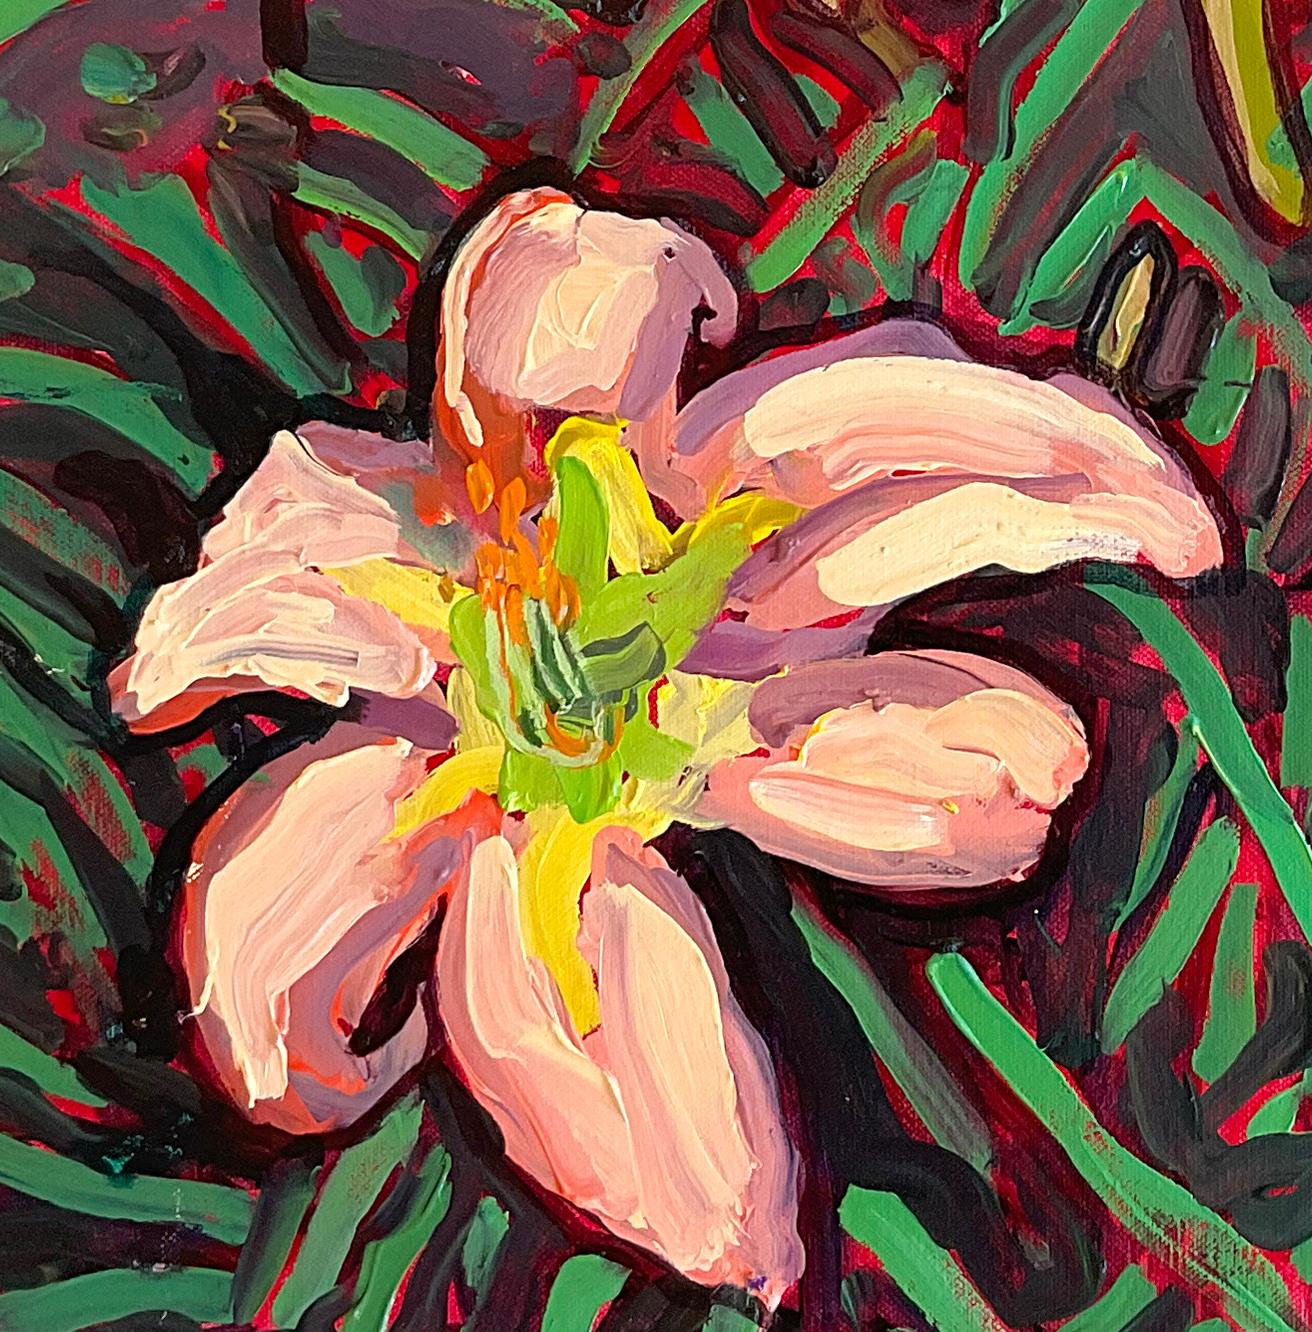 Peach Lilies (Contemporary Still Life of Vibrant Tiger Lilies, Oil on canvas)  - Painting by Dan Rupe